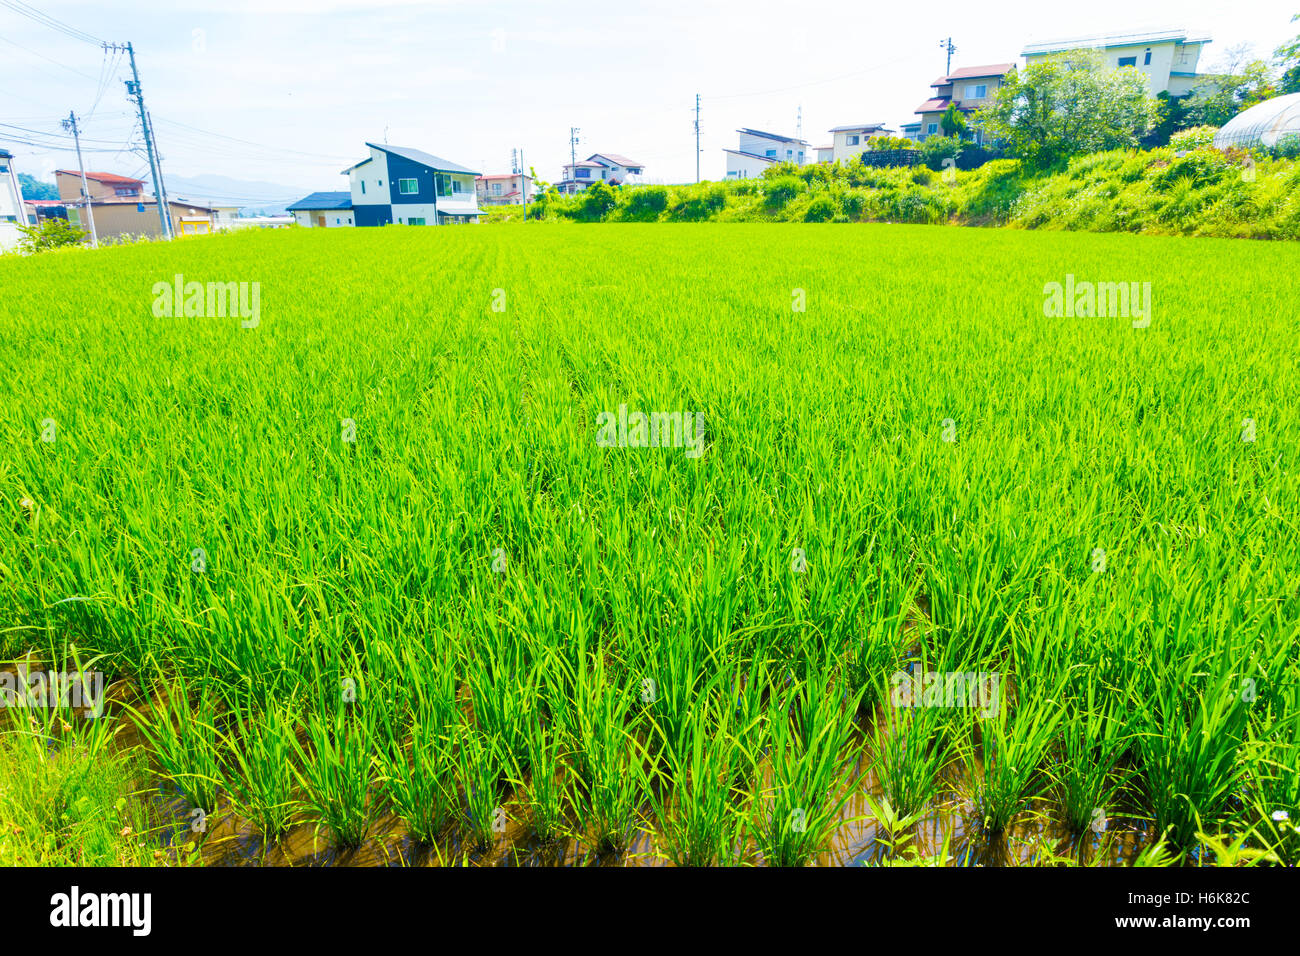 Residential houses seen behind green stalks of grass on small plot of land used for rice farming in rural Japan. Horizontal Stock Photo